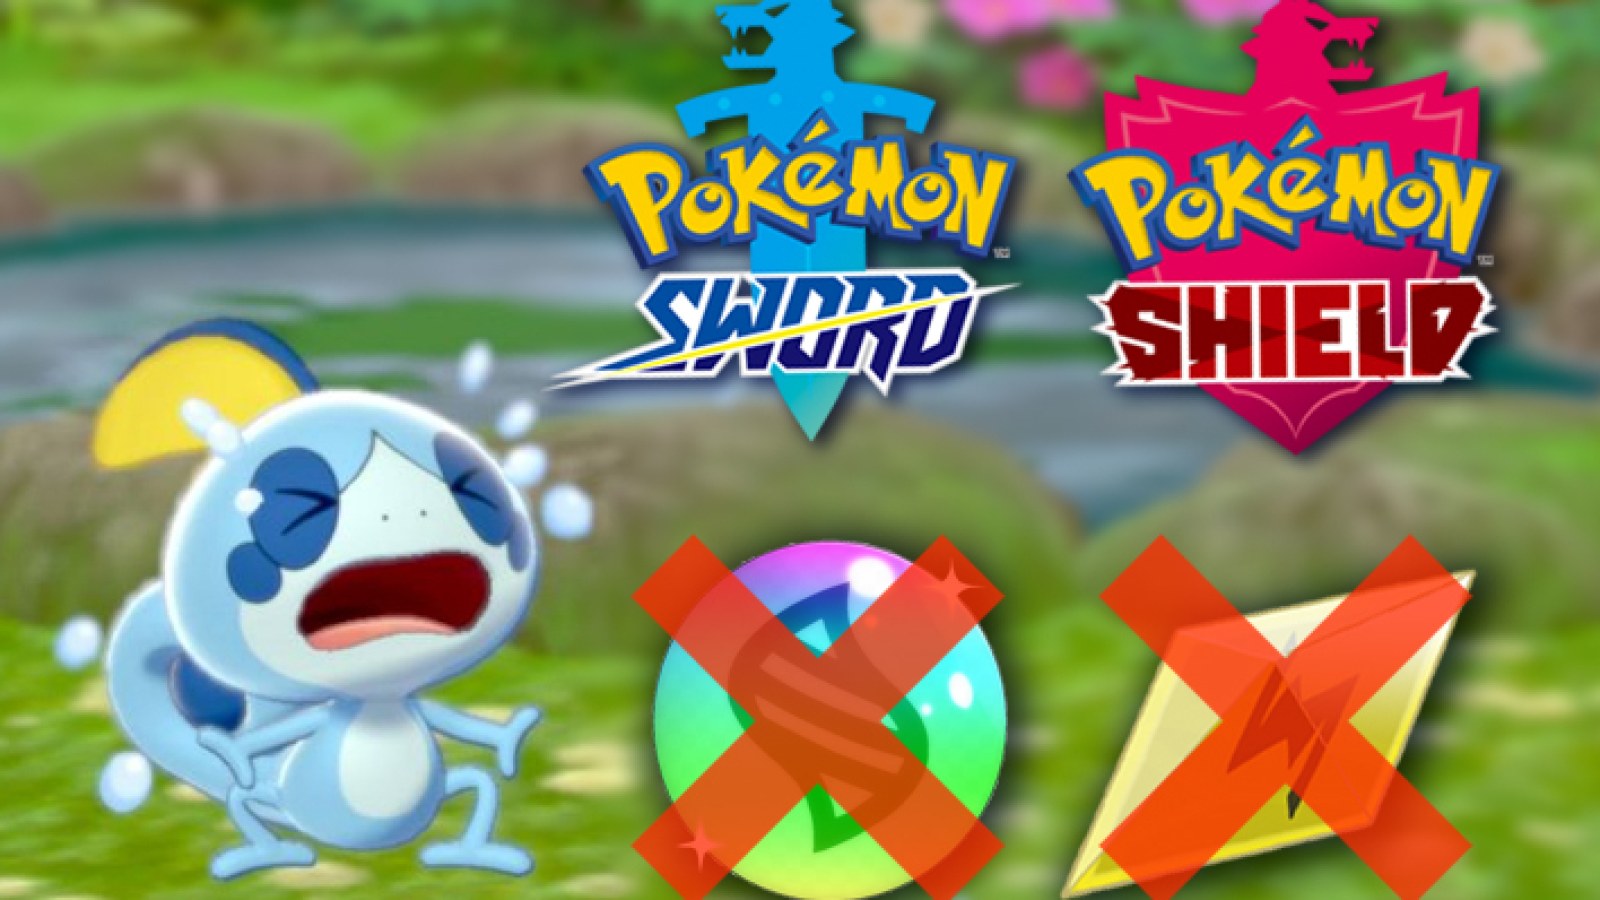 Pokémon Sword and Shield' Producer Confirms Mega Evolutions and Z-Moves  Won't Appear